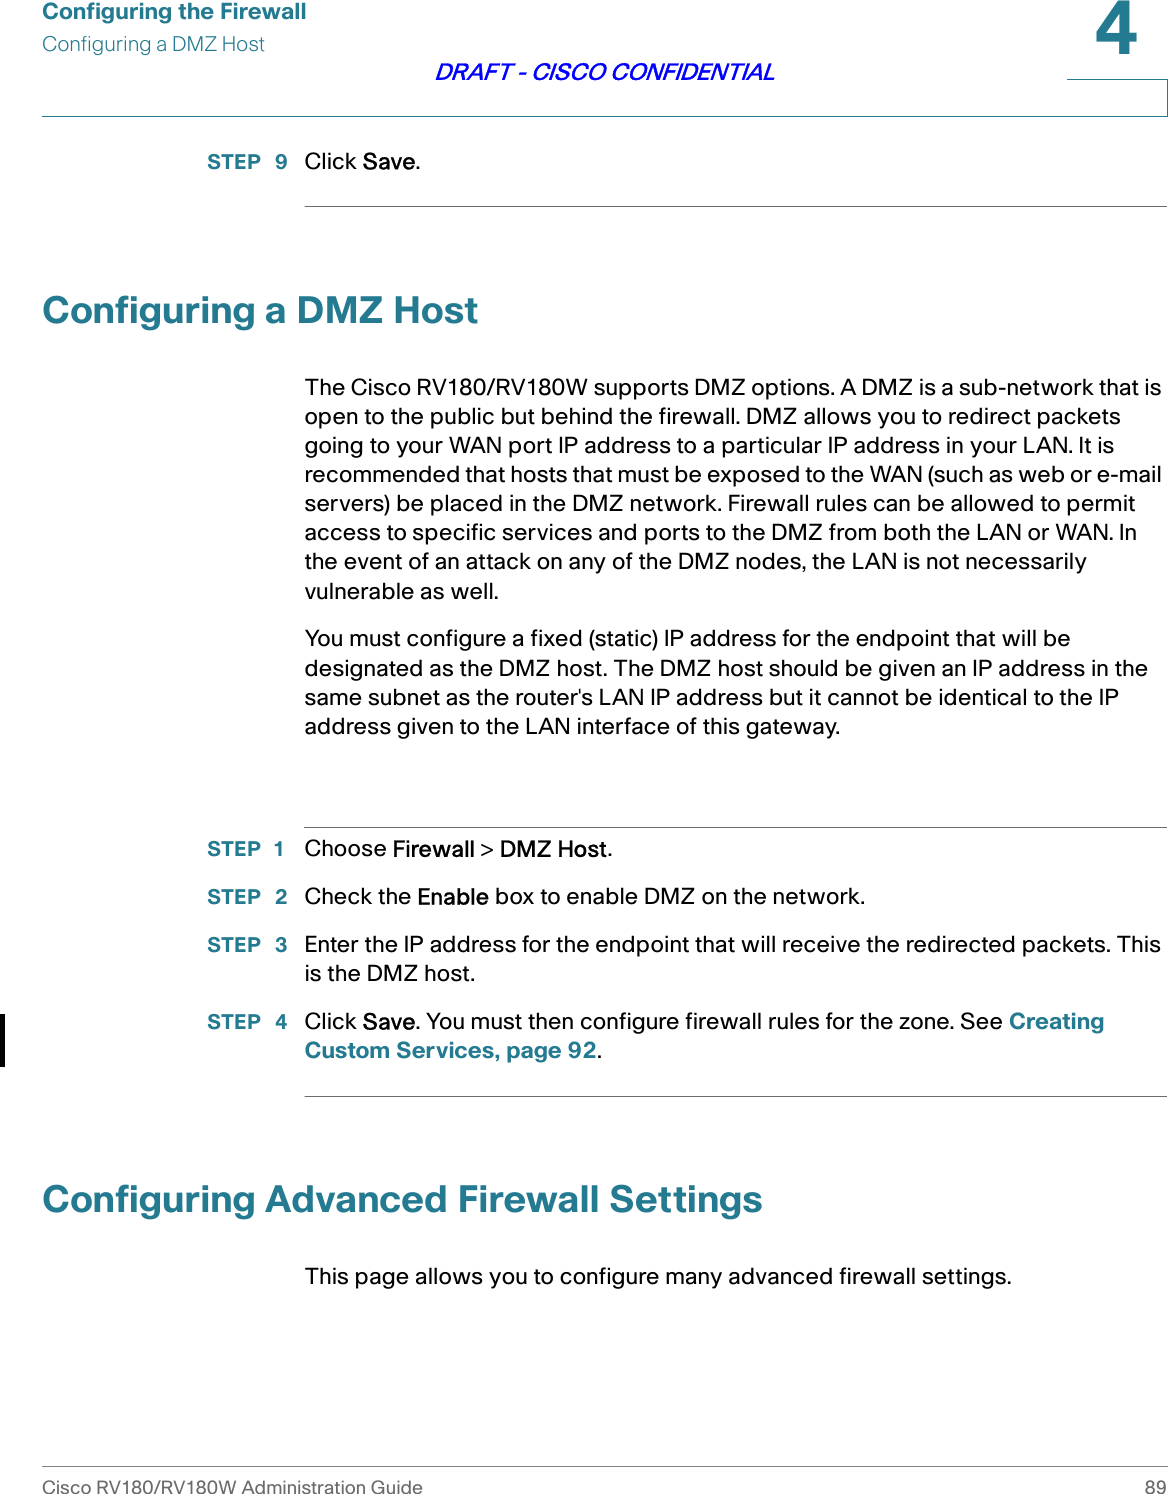 Configuring the FirewallConfiguring a DMZ HostCisco RV180/RV180W Administration Guide 894DRAFT - CISCO CONFIDENTIALSTEP  9 Click Save. Configuring a DMZ HostThe Cisco RV180/RV180W supports DMZ options. A DMZ is a sub-network that is open to the public but behind the firewall. DMZ allows you to redirect packets going to your WAN port IP address to a particular IP address in your LAN. It is recommended that hosts that must be exposed to the WAN (such as web or e-mail servers) be placed in the DMZ network. Firewall rules can be allowed to permit access to specific services and ports to the DMZ from both the LAN or WAN. In the event of an attack on any of the DMZ nodes, the LAN is not necessarily vulnerable as well. You must configure a fixed (static) IP address for the endpoint that will be designated as the DMZ host. The DMZ host should be given an IP address in the same subnet as the router&apos;s LAN IP address but it cannot be identical to the IP address given to the LAN interface of this gateway. STEP 1 Choose Firewall &gt; DMZ Host.STEP  2 Check the Enable box to enable DMZ on the network.STEP  3 Enter the IP address for the endpoint that will receive the redirected packets. This is the DMZ host.STEP  4 Click Save. You must then configure firewall rules for the zone. See Creating Custom Services, page 92.Configuring Advanced Firewall SettingsThis page allows you to configure many advanced firewall settings.